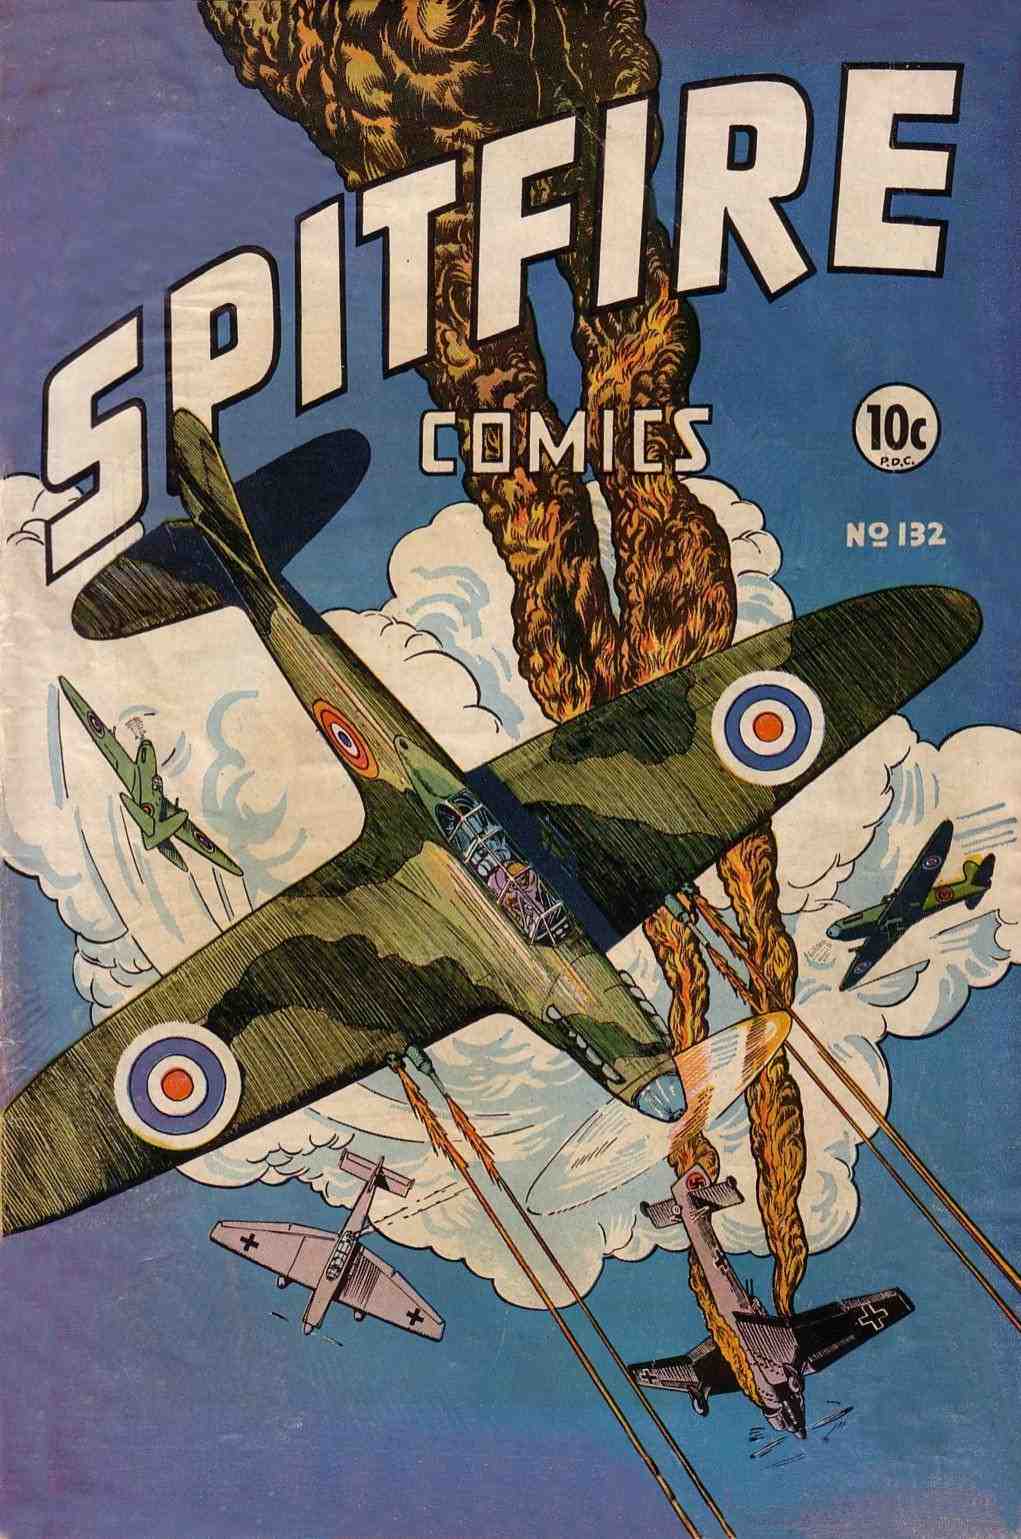 Book Cover For Spitfire Comics 132